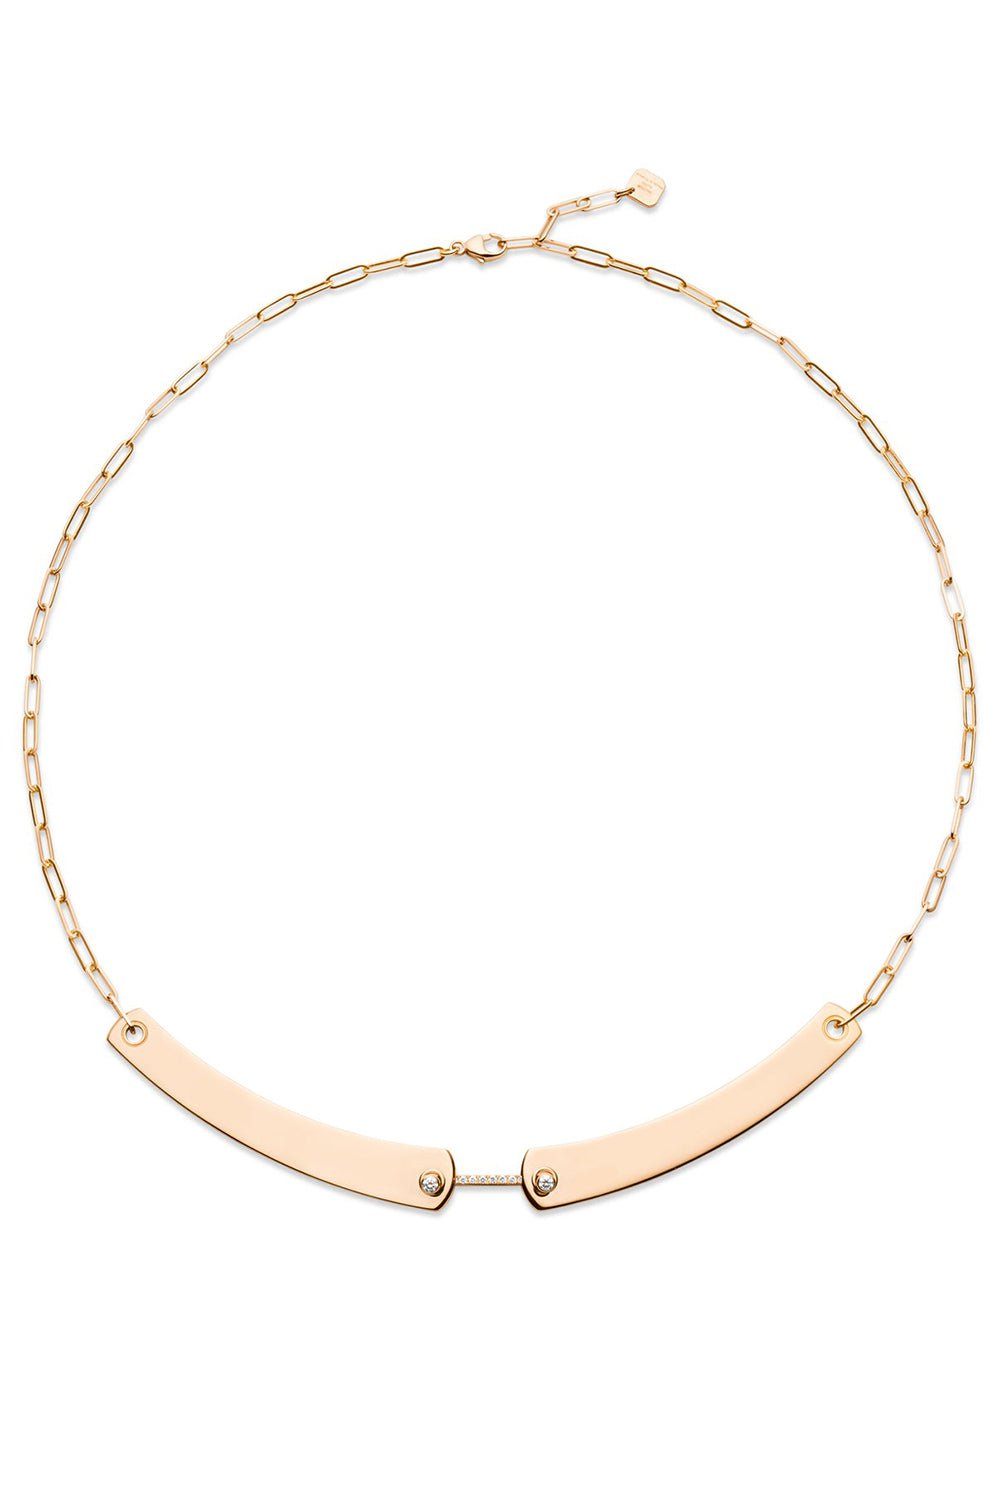 NOUVEL HERITAGE-Business Meeting Mood Necklace-ROSE GOLD